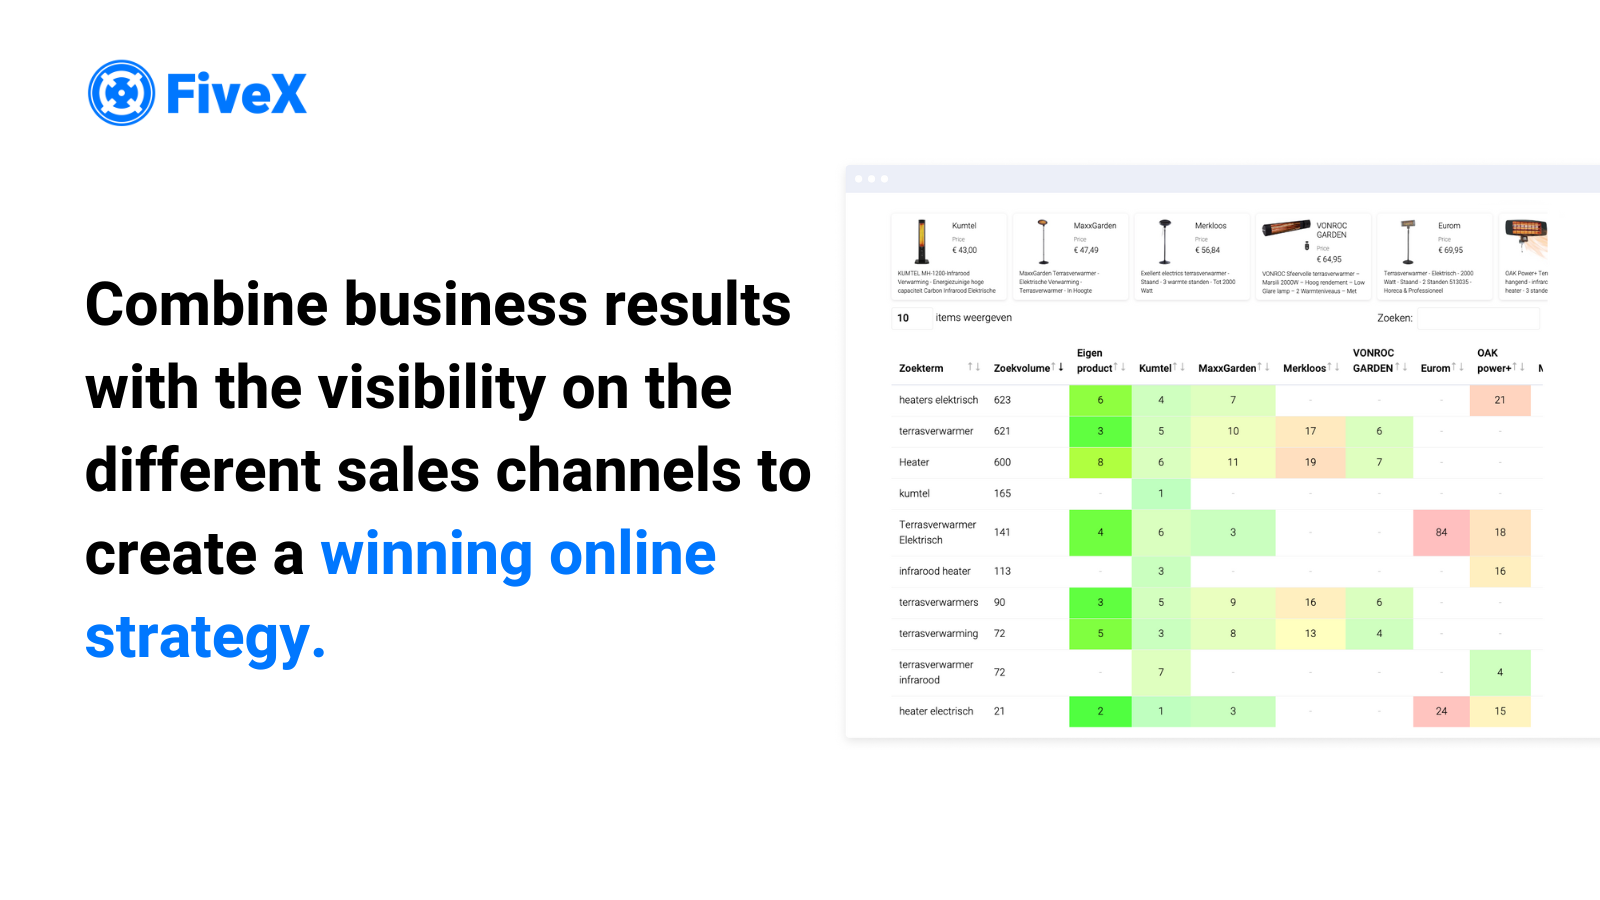 Gaining insights in the marketshare, keyword rankings and competitors analysis will help you in creating a winning online strategy. See how the ads impact the organic ranking.